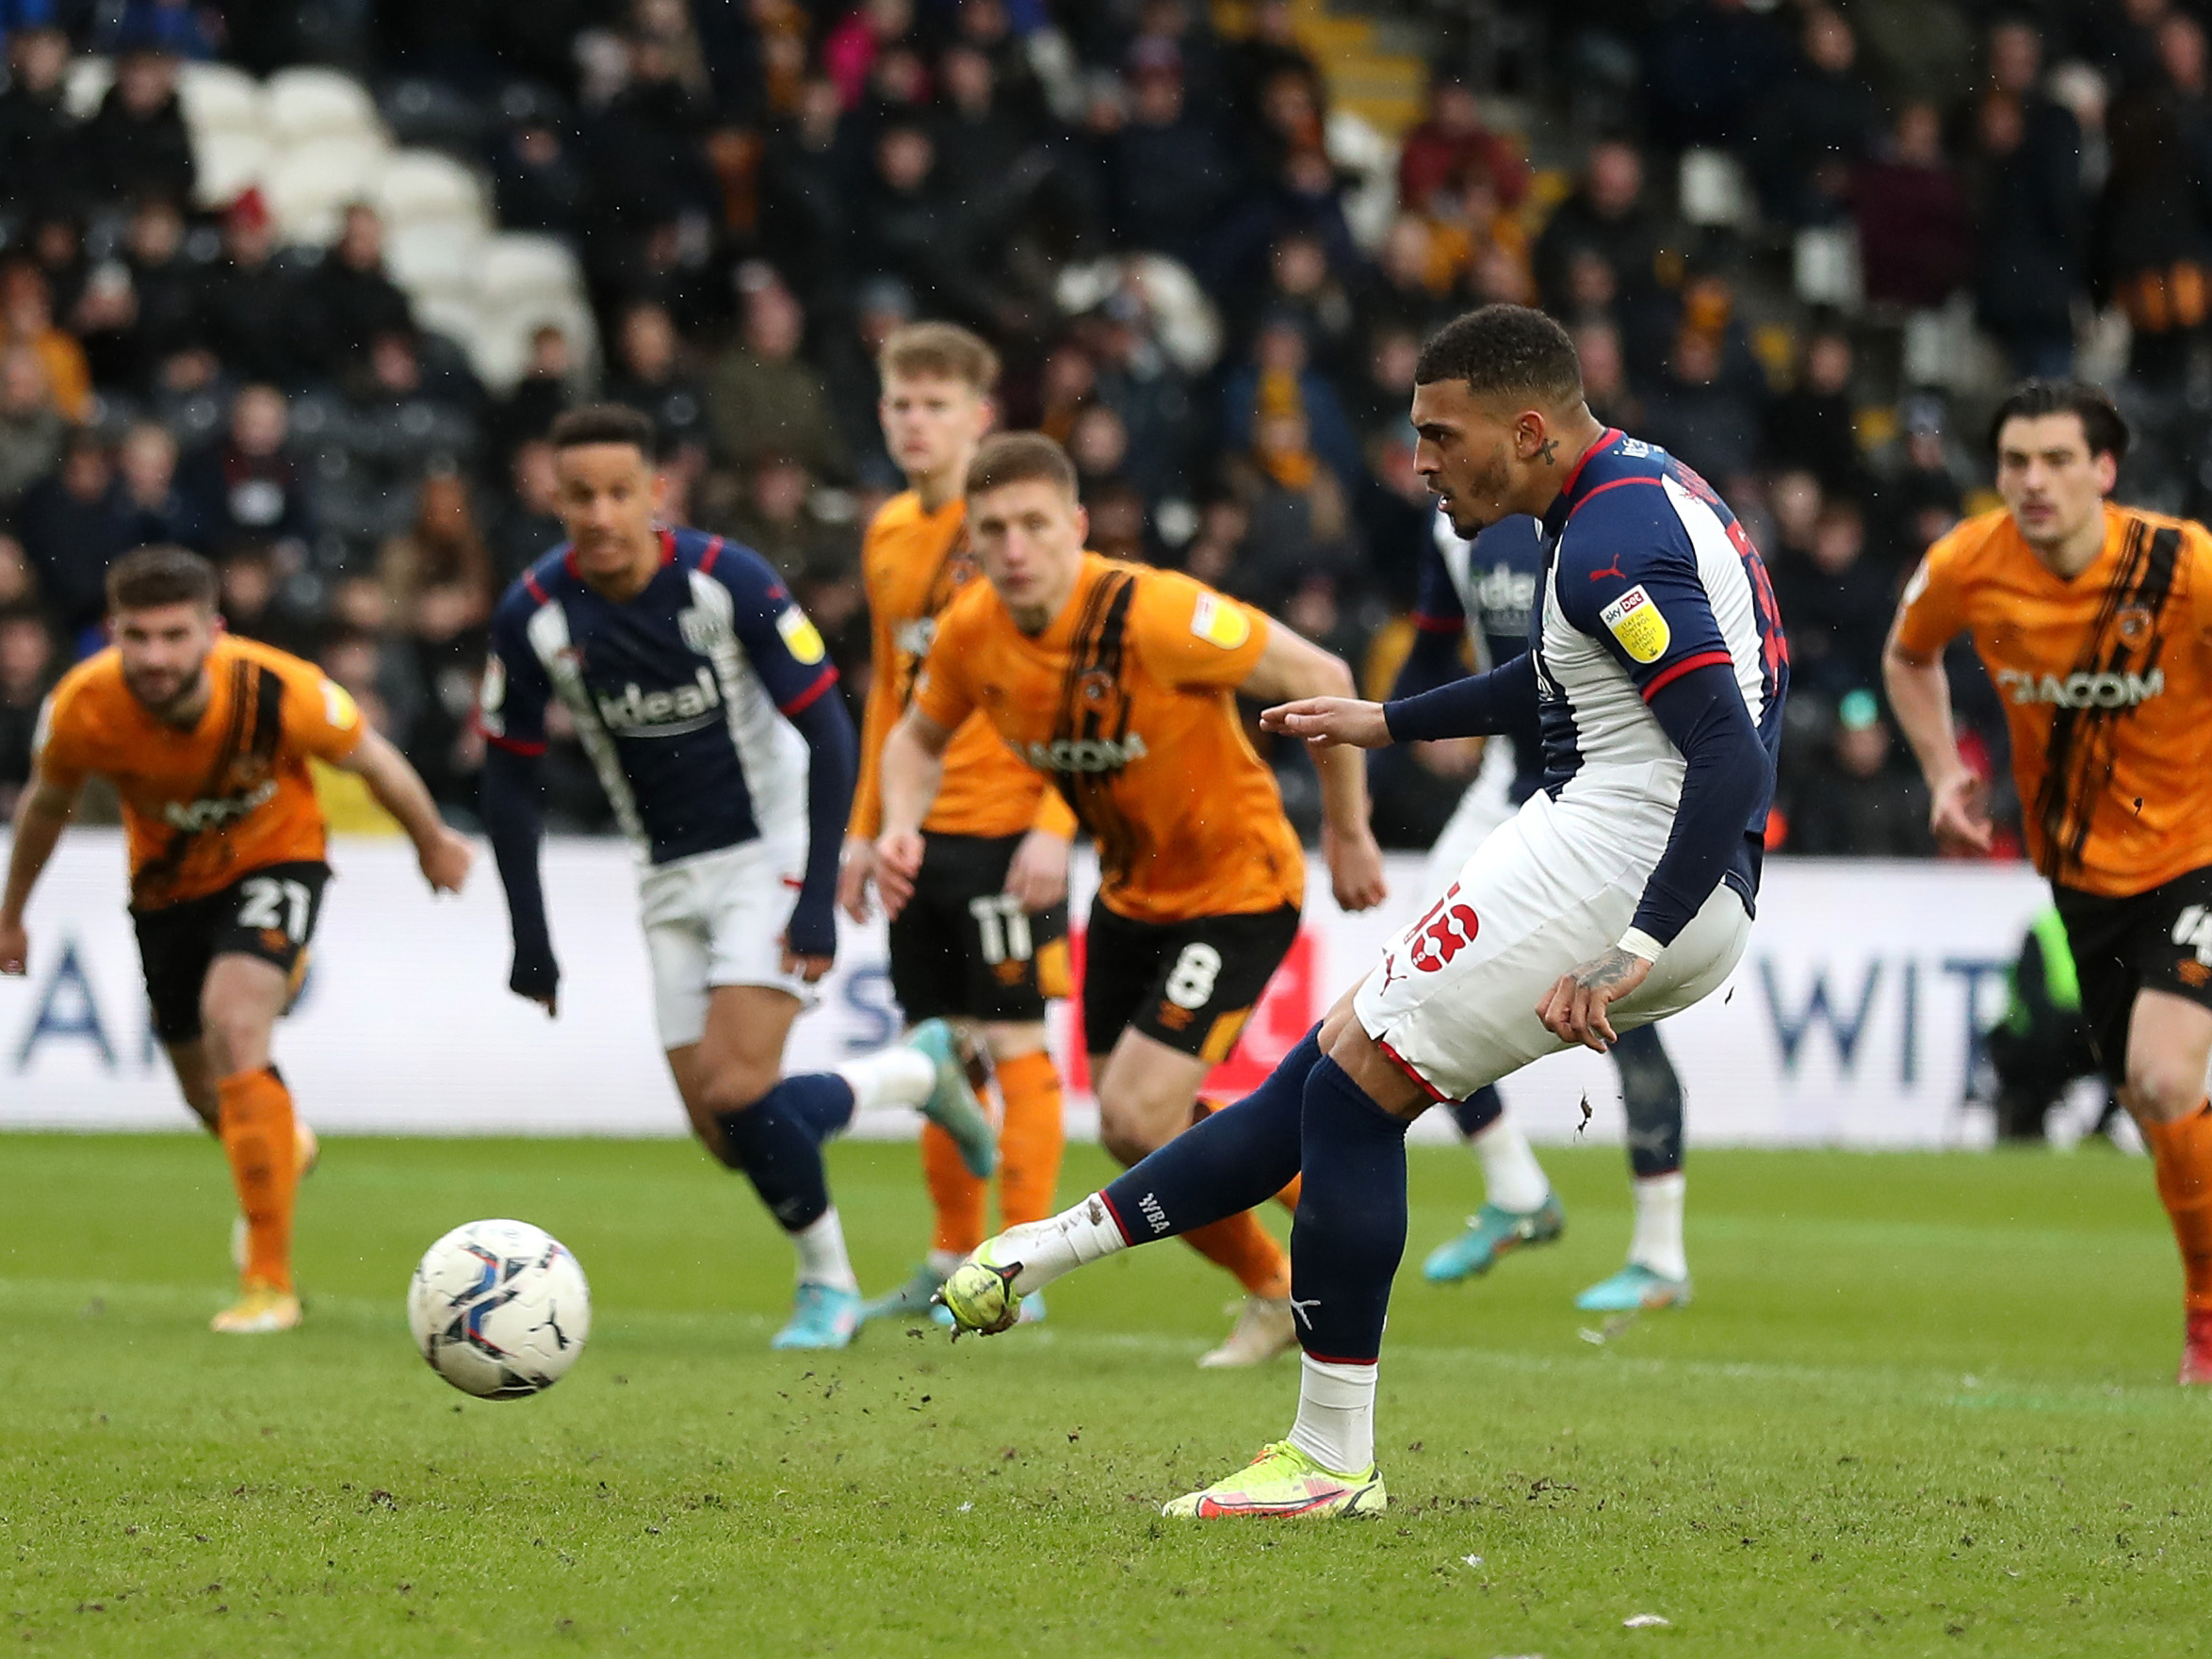 Hull 0 Albion 2